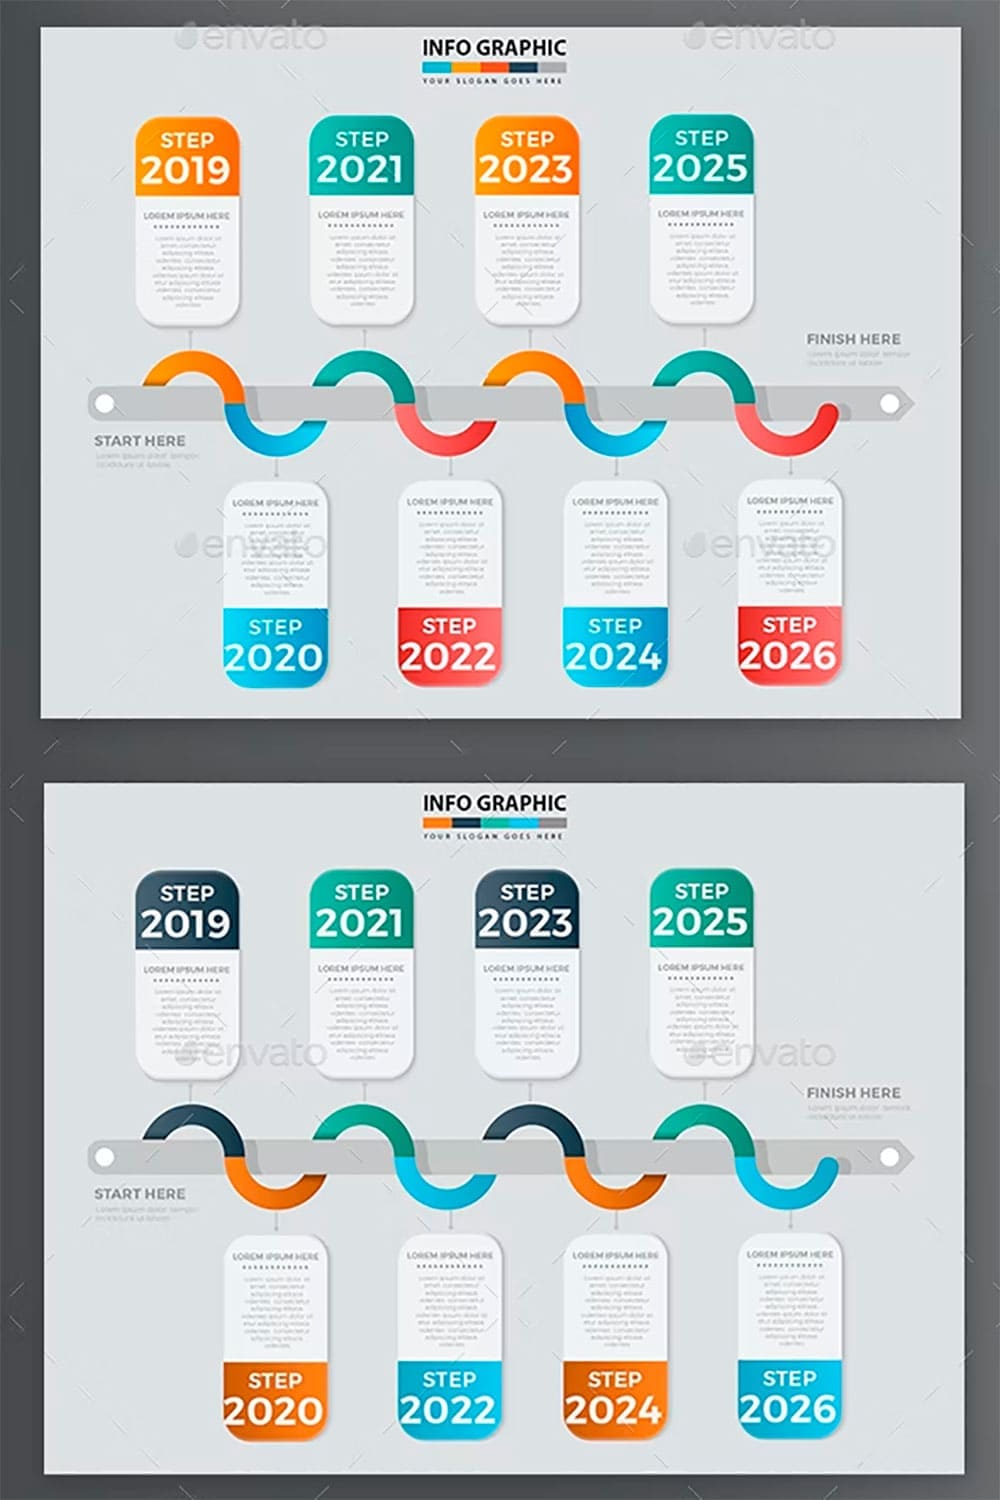 Timeline infographic design 694, picture for pinterest.